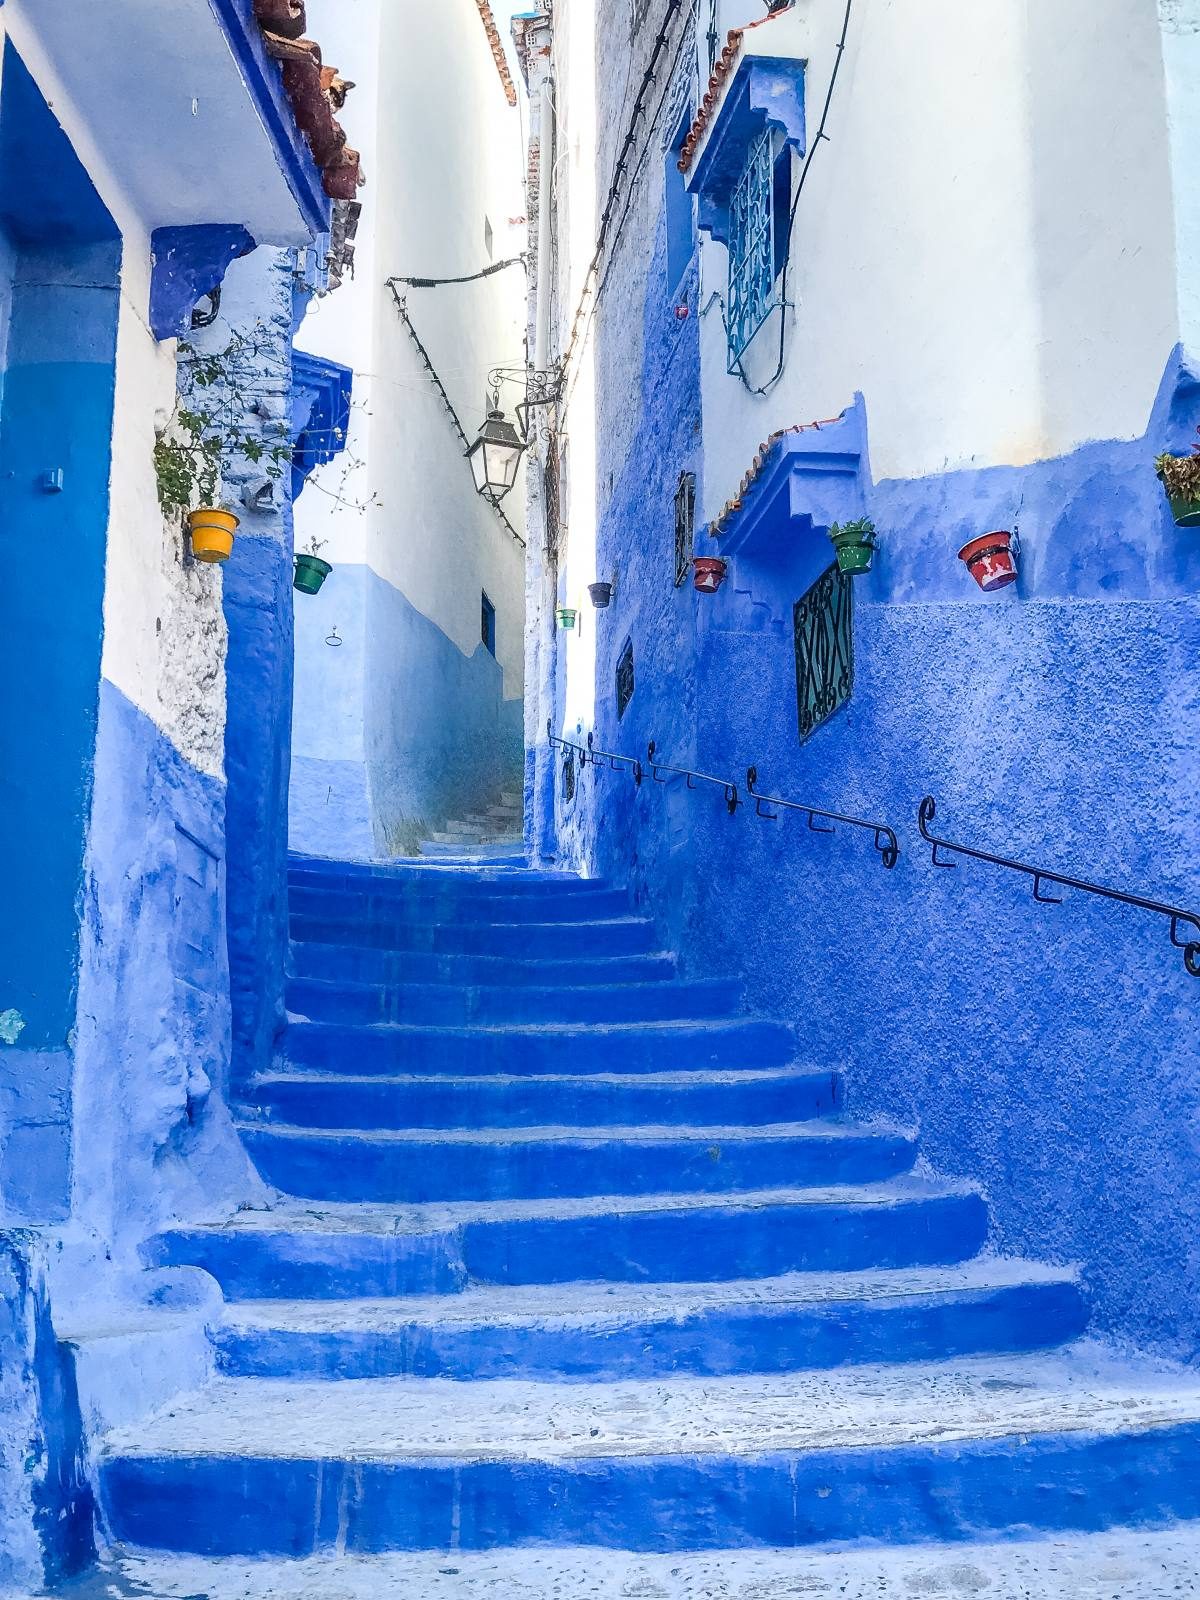 Chefchaouen Morocco: Everything You Need to Know Before Your Visit